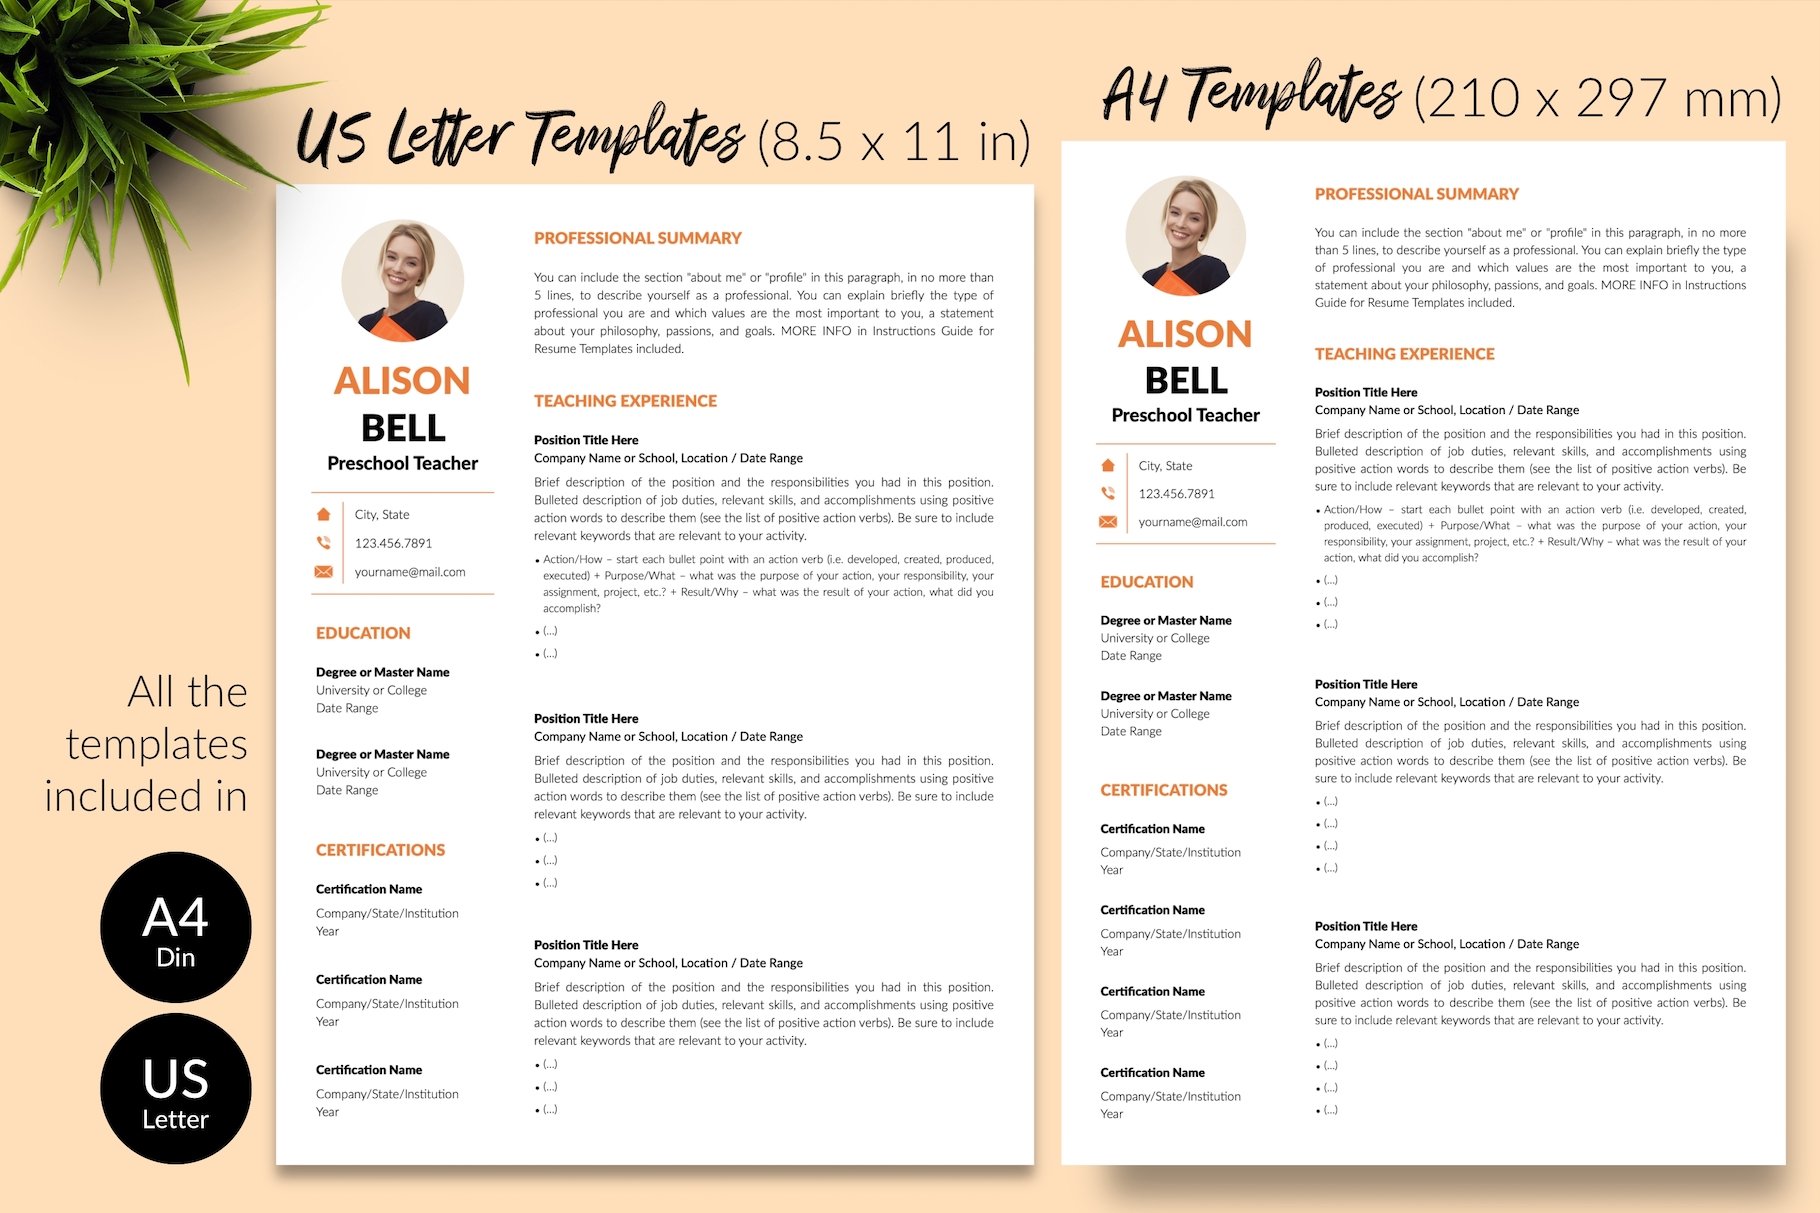 resume cv template alison bell for creative market 08 size din a4 us letter 740